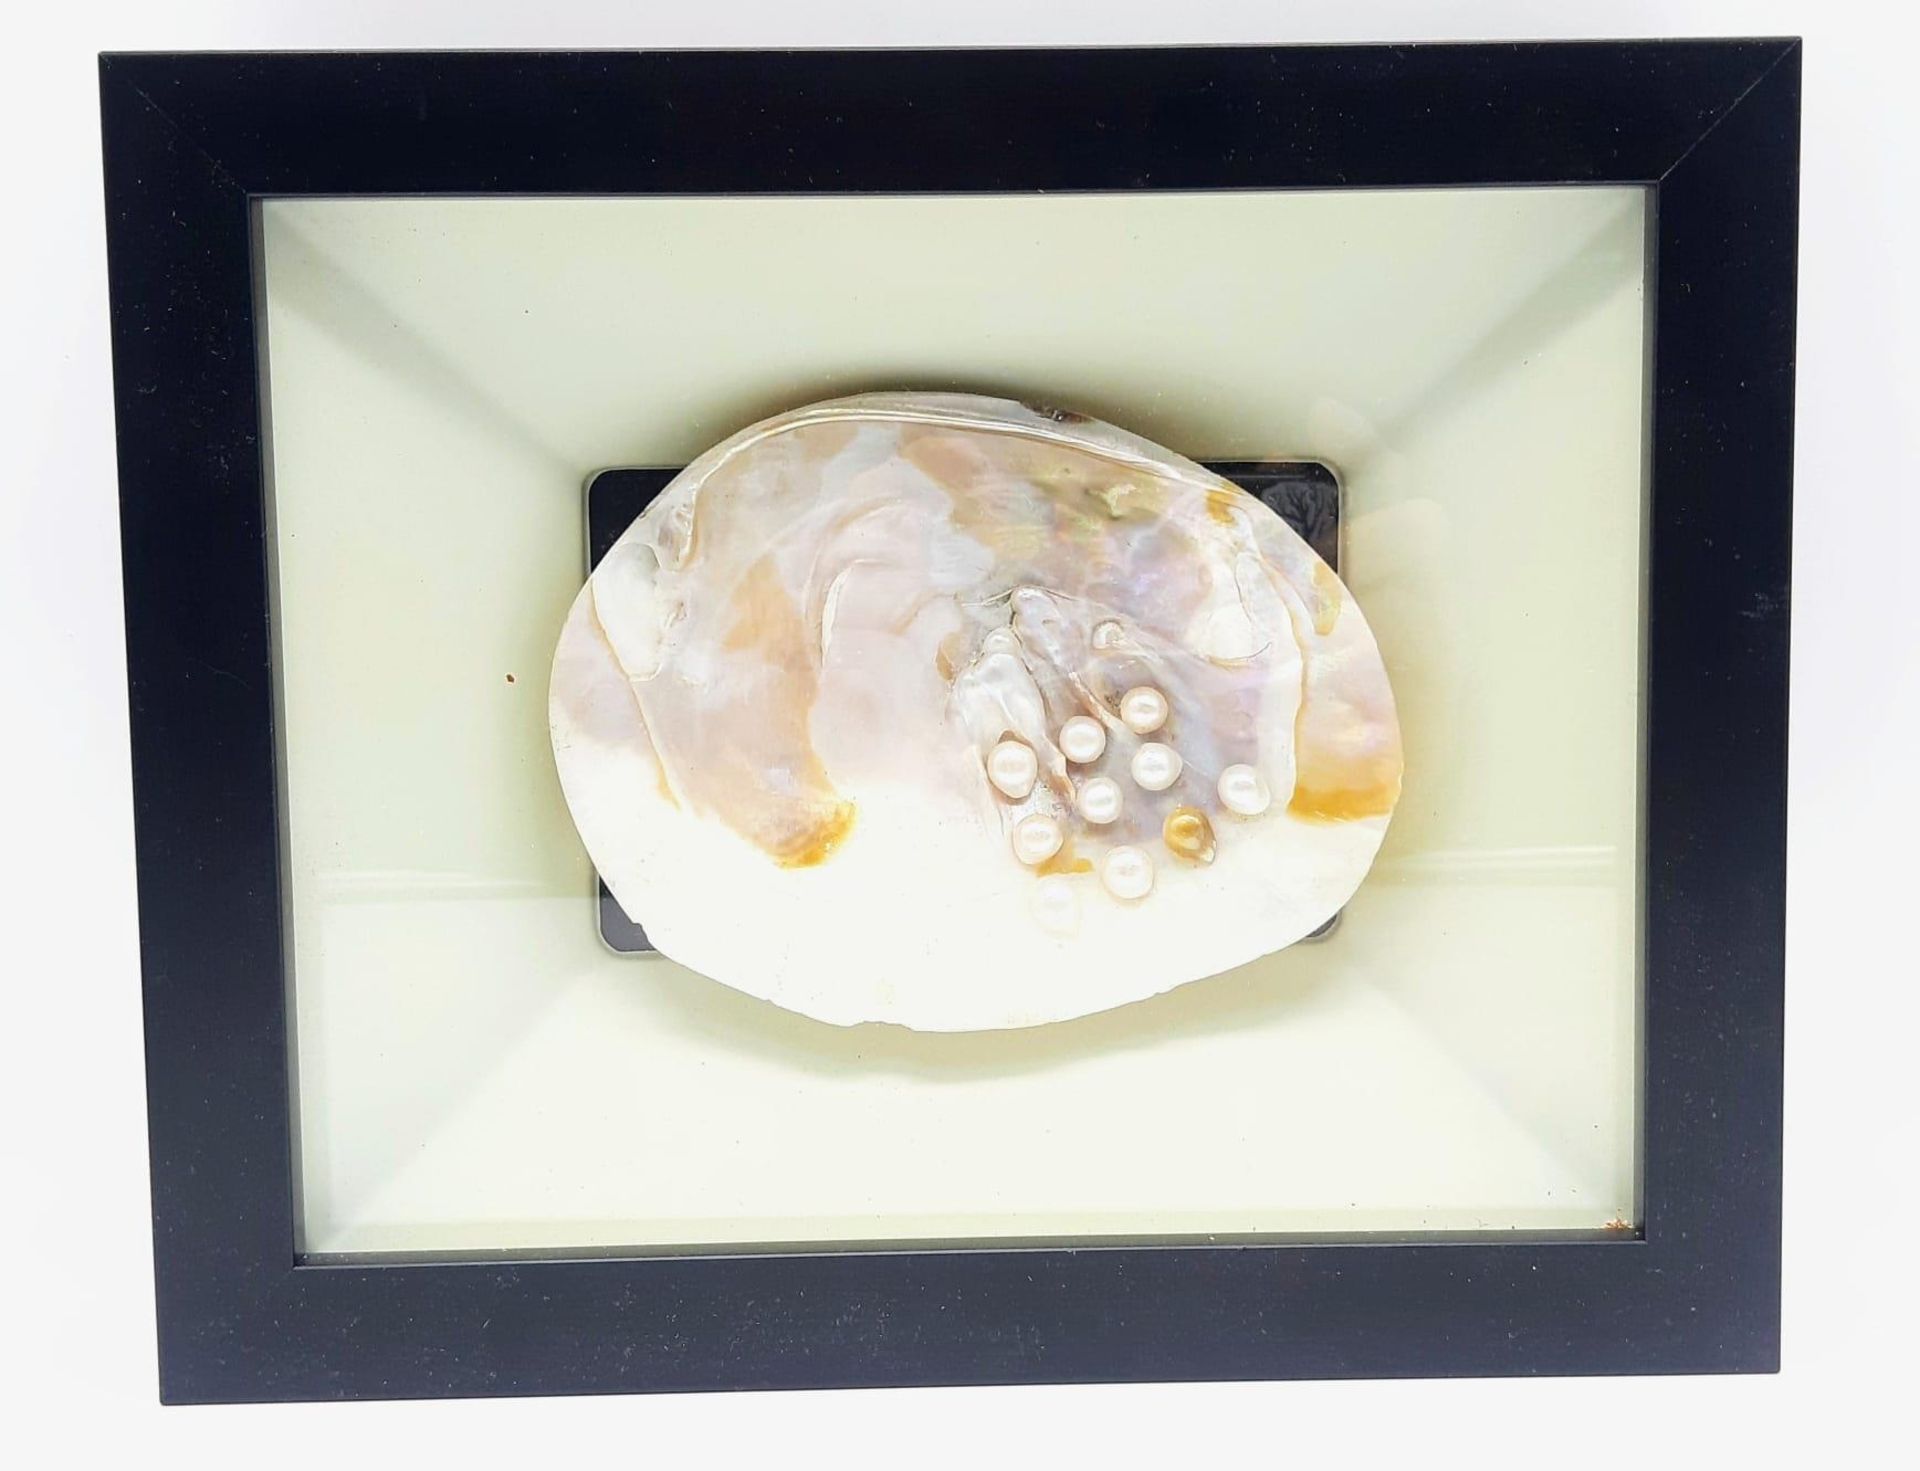 A Natural History marvel: A framed specimen of a large freshwater mussel with pearls. Dimensions: 28